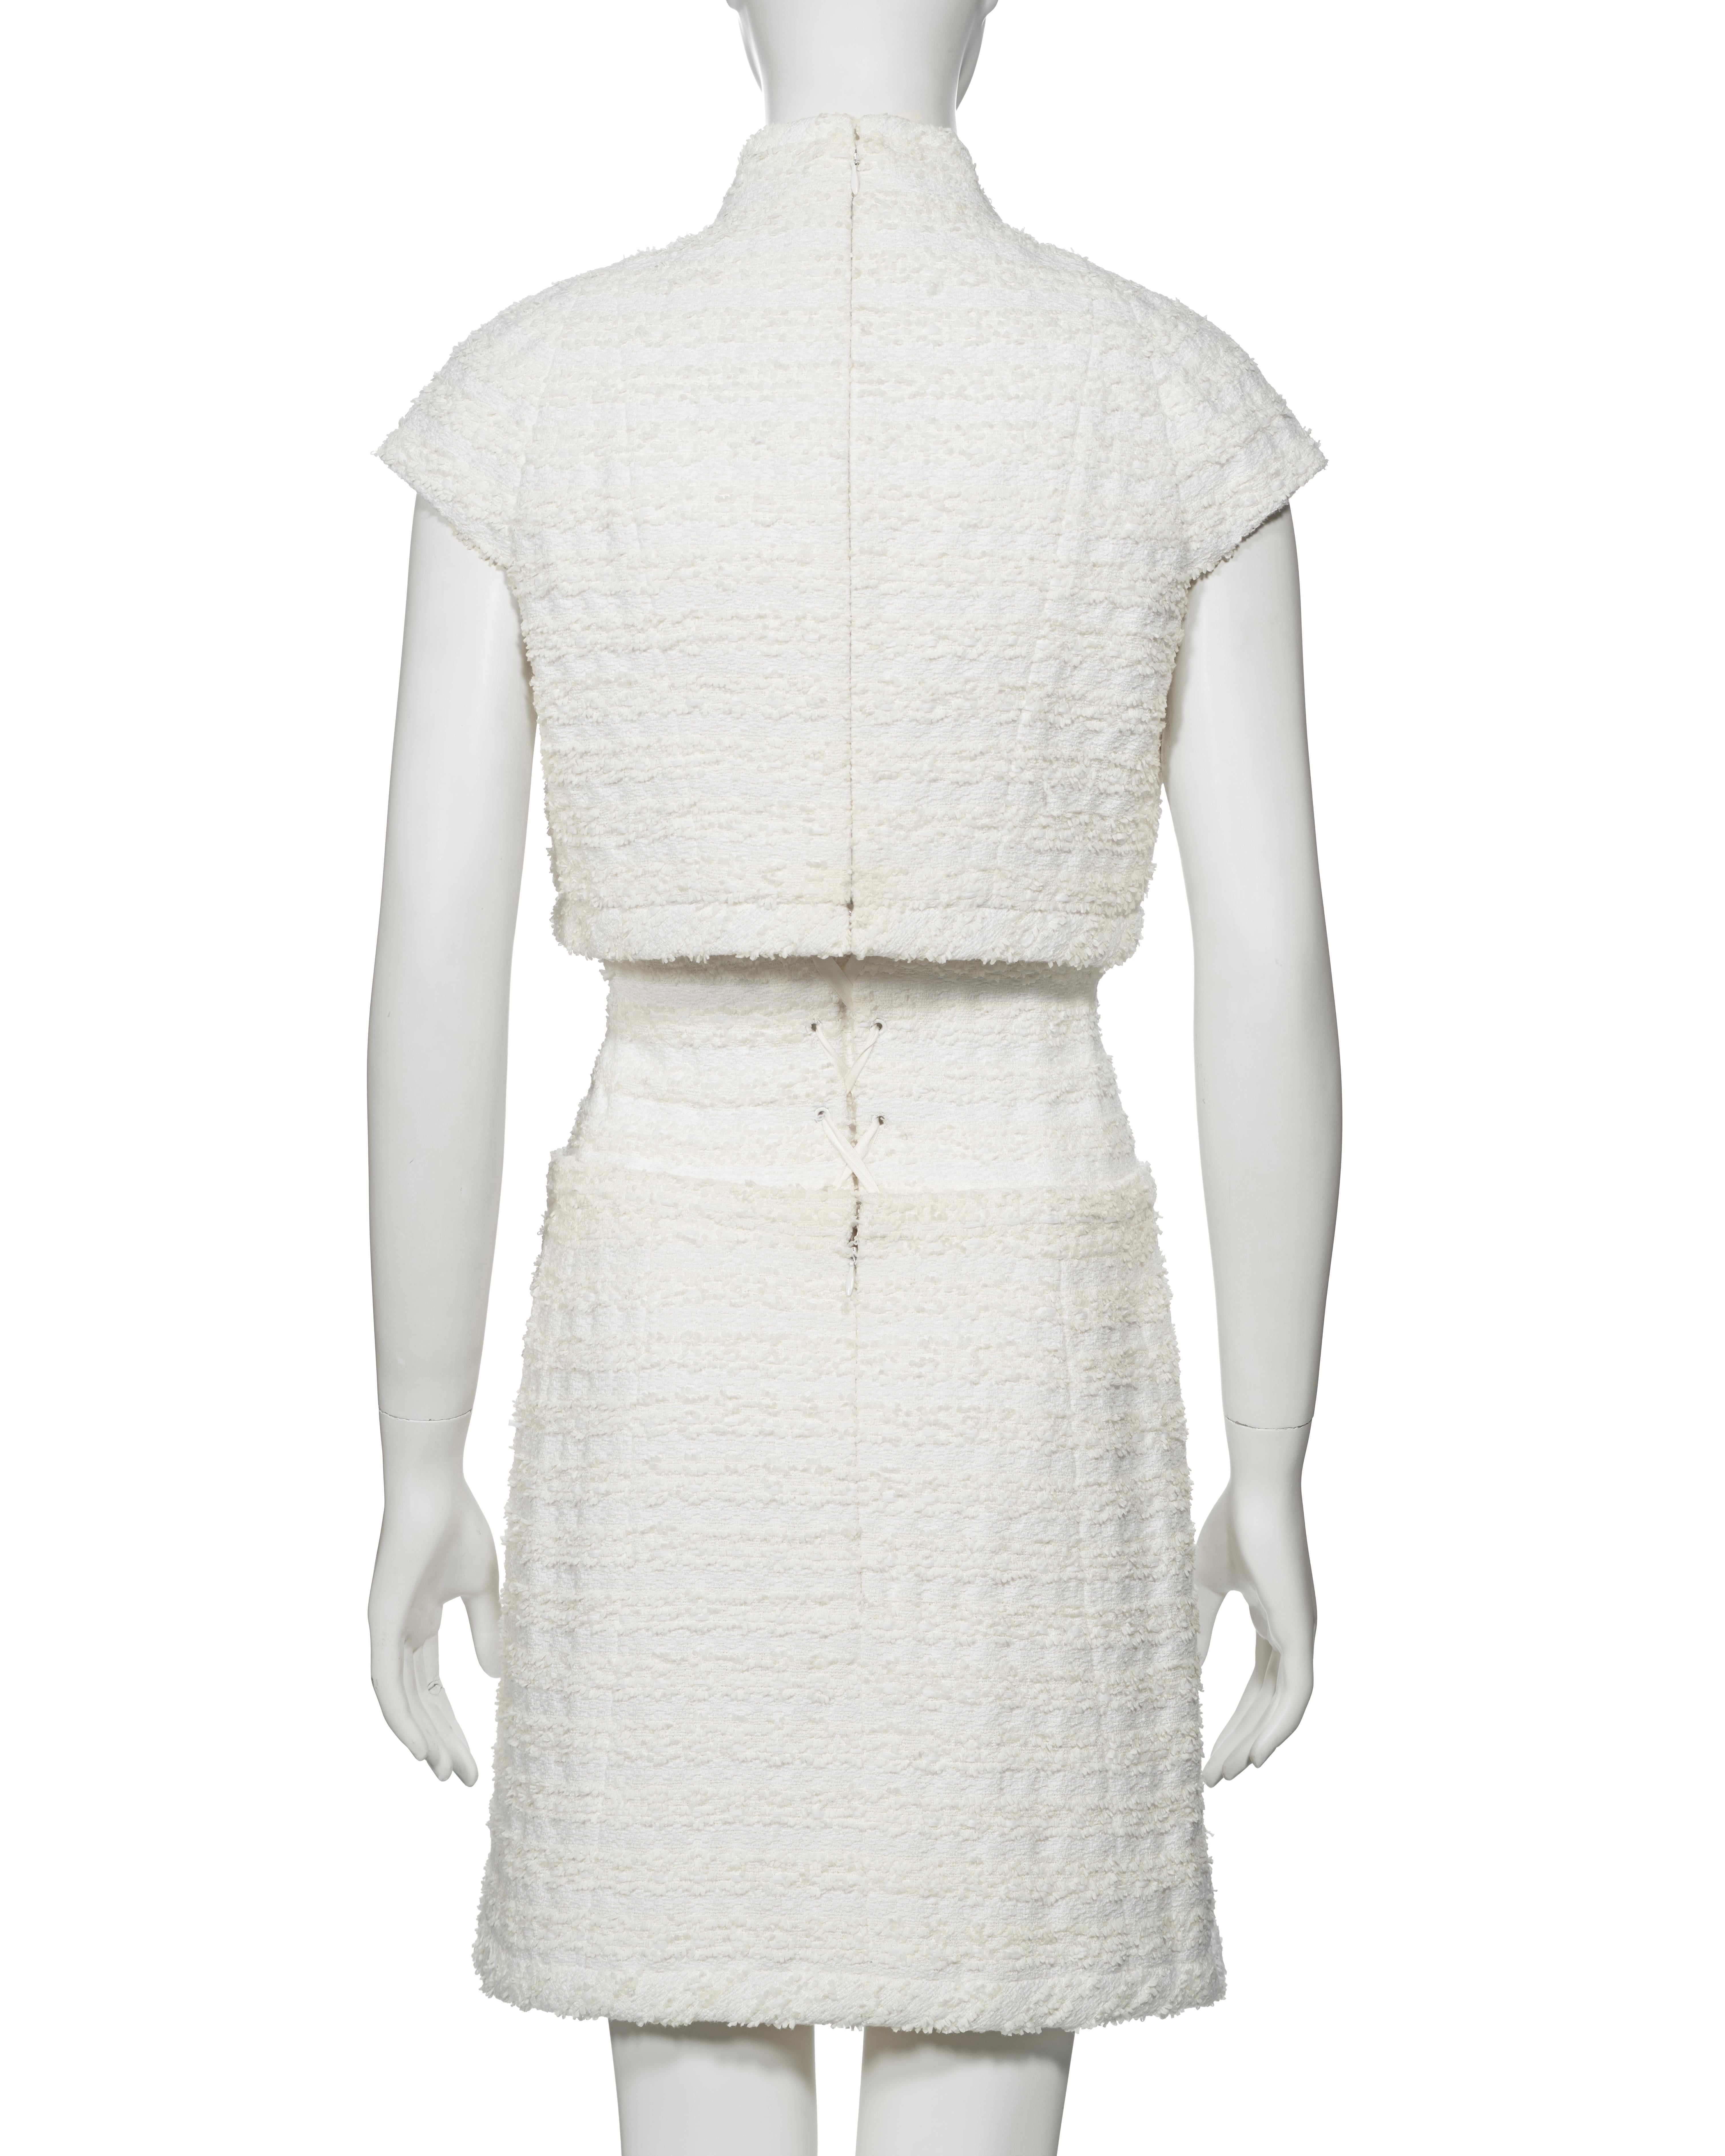 Chanel by Karl Lagerfeld Haute Couture White Bouclé Corseted Skirt Suit, ss 2014 For Sale 7